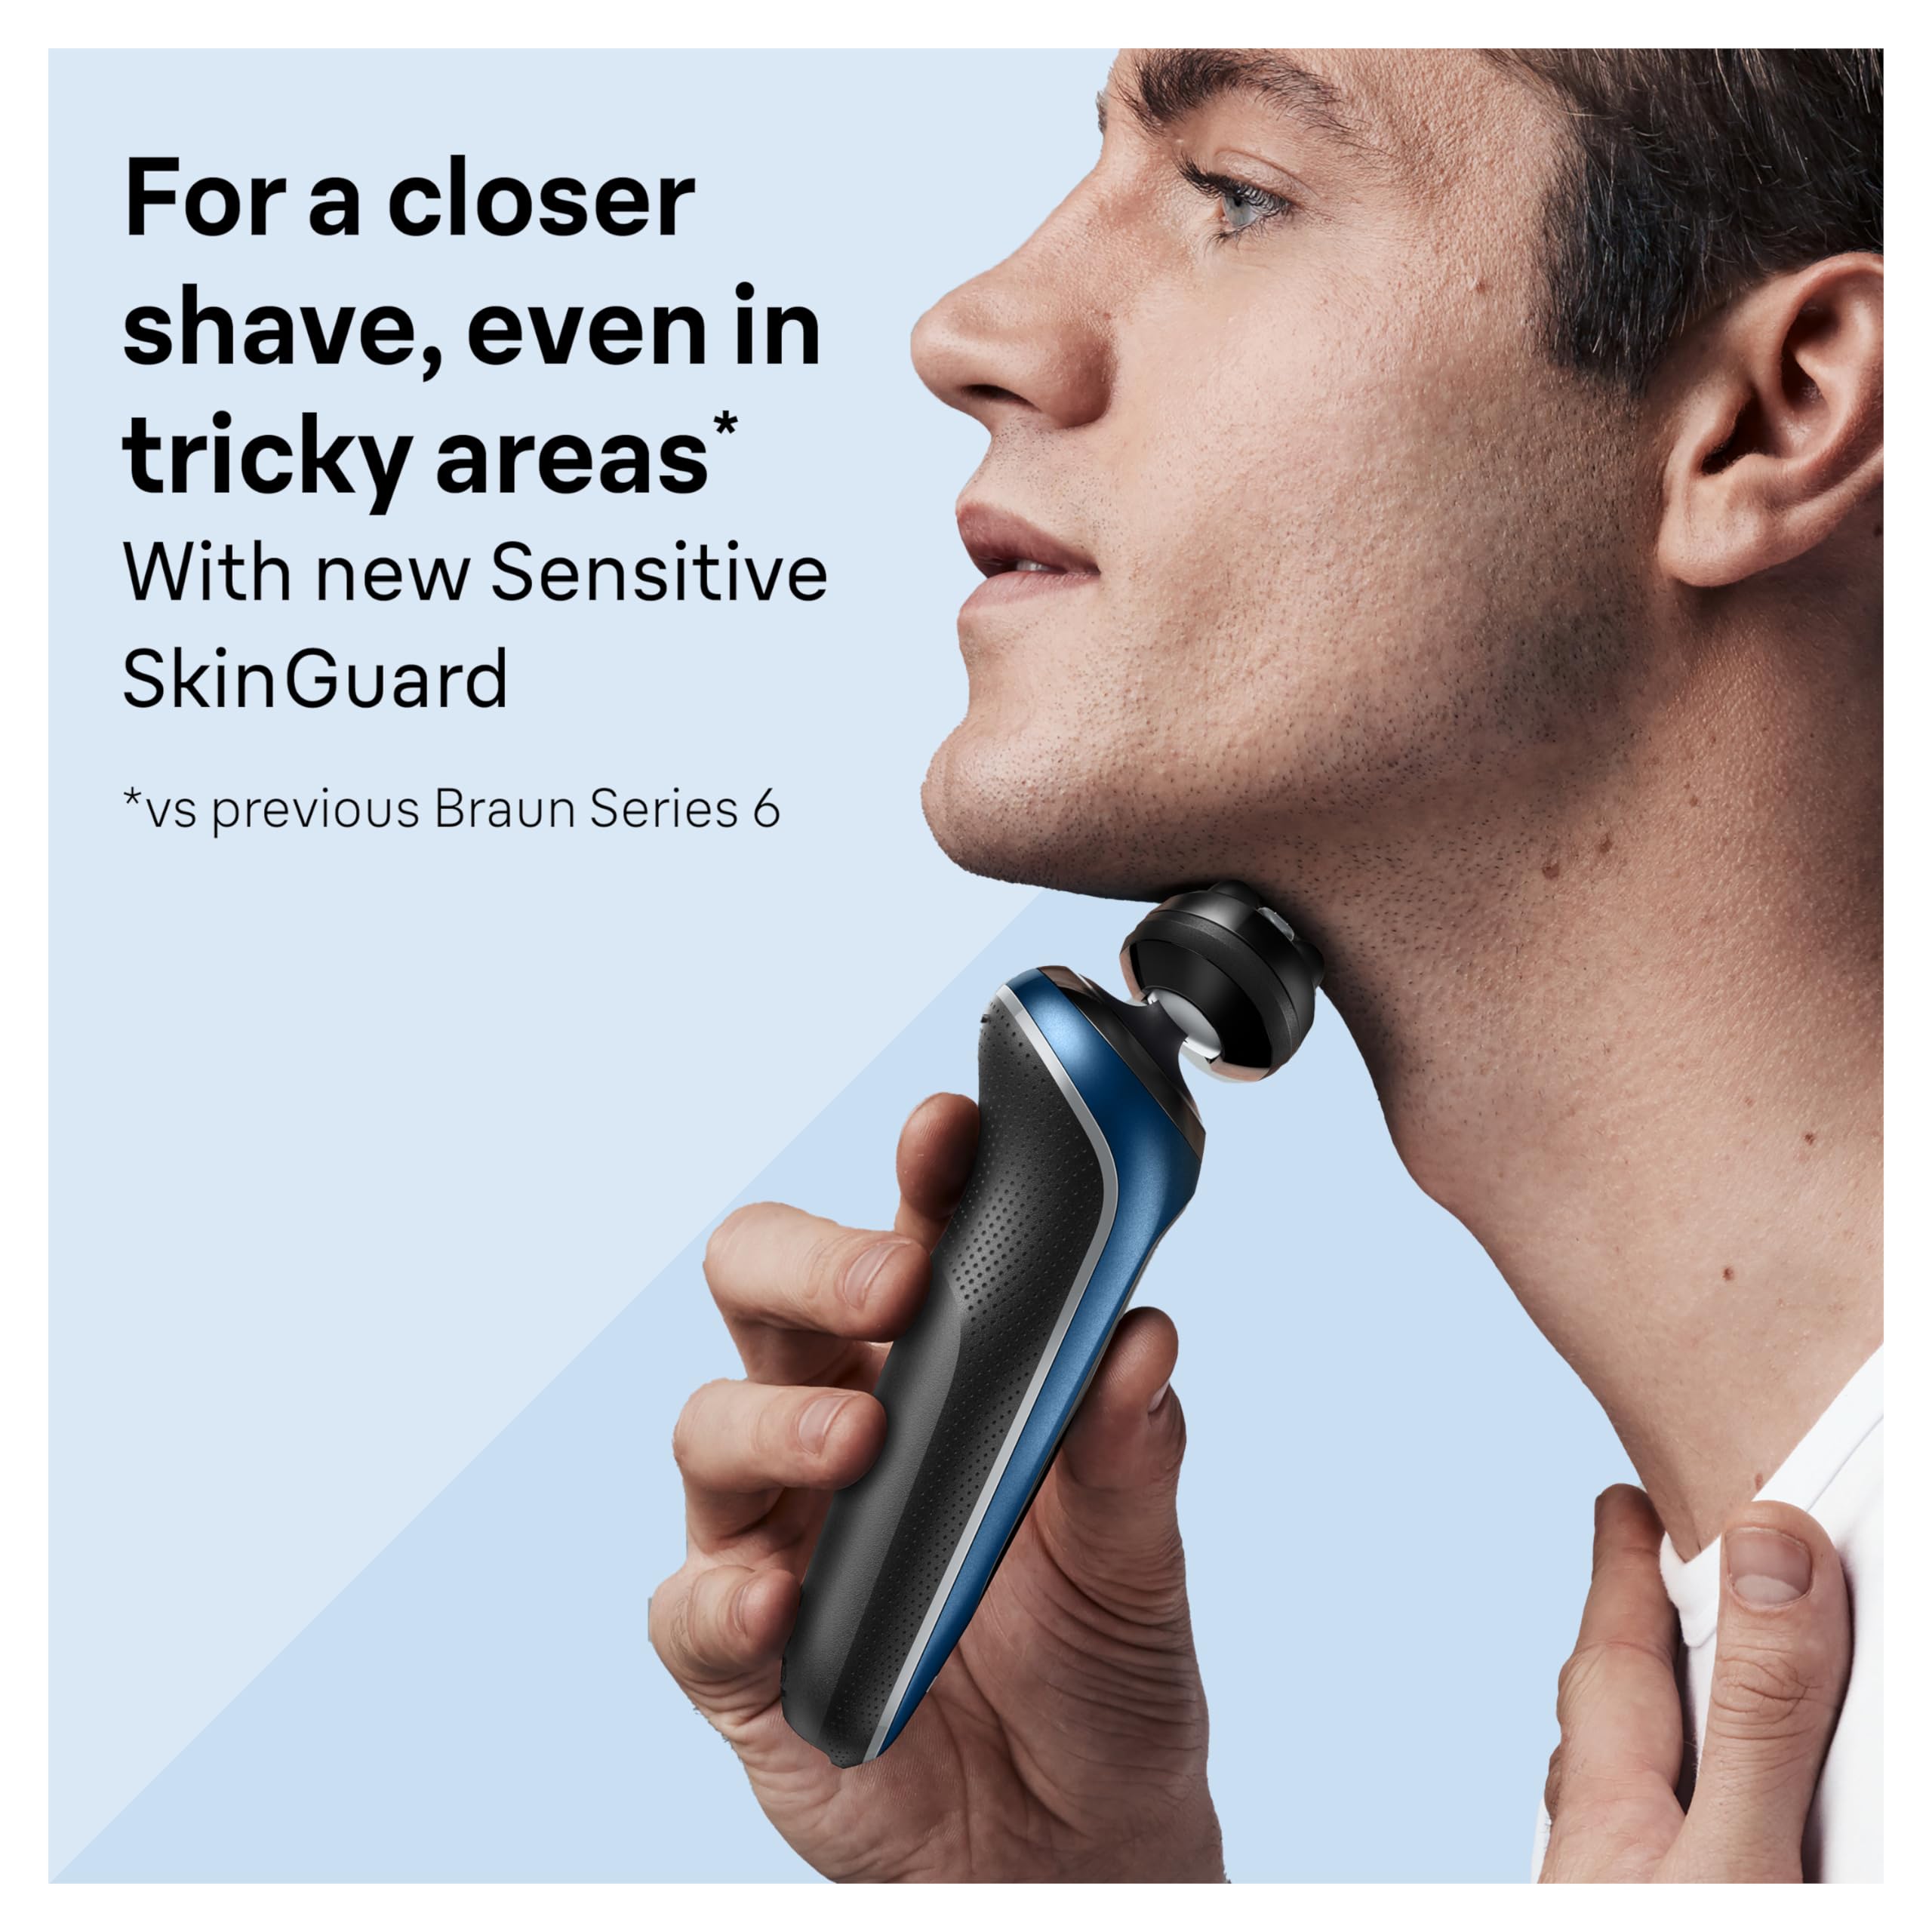 Braun Series 6 Electric Shaver Replacement Head with Sensitive Skinguard, Easily Attach Your Shaver Head, Compatible with New Generation Series 6 Shavers, 64B, Black